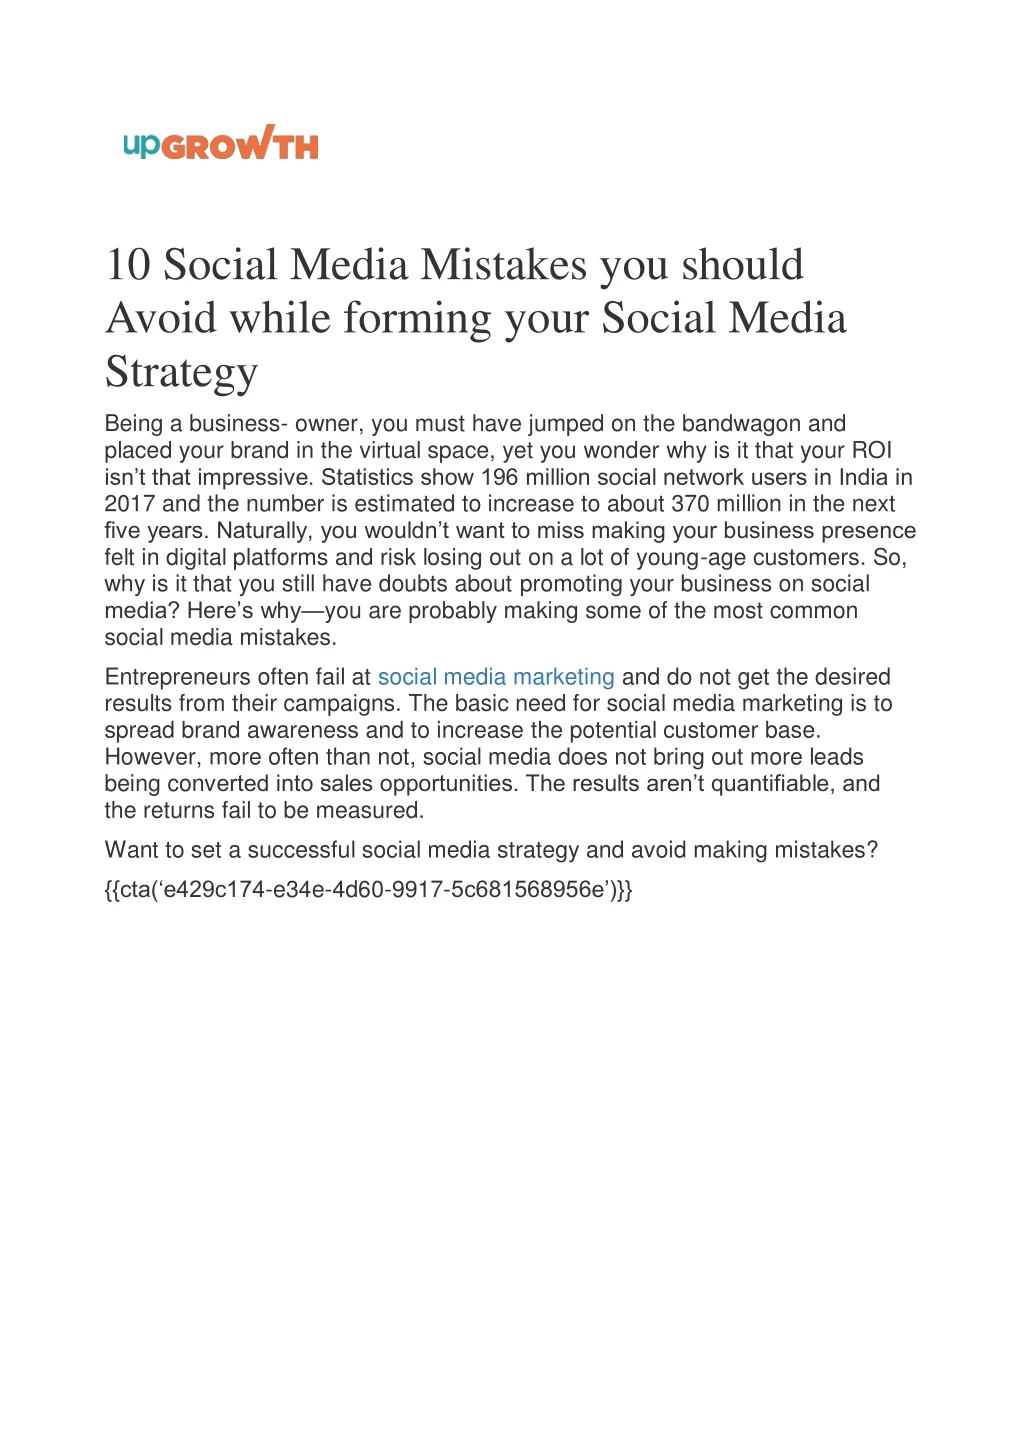 10 social media mistakes you should avoid while